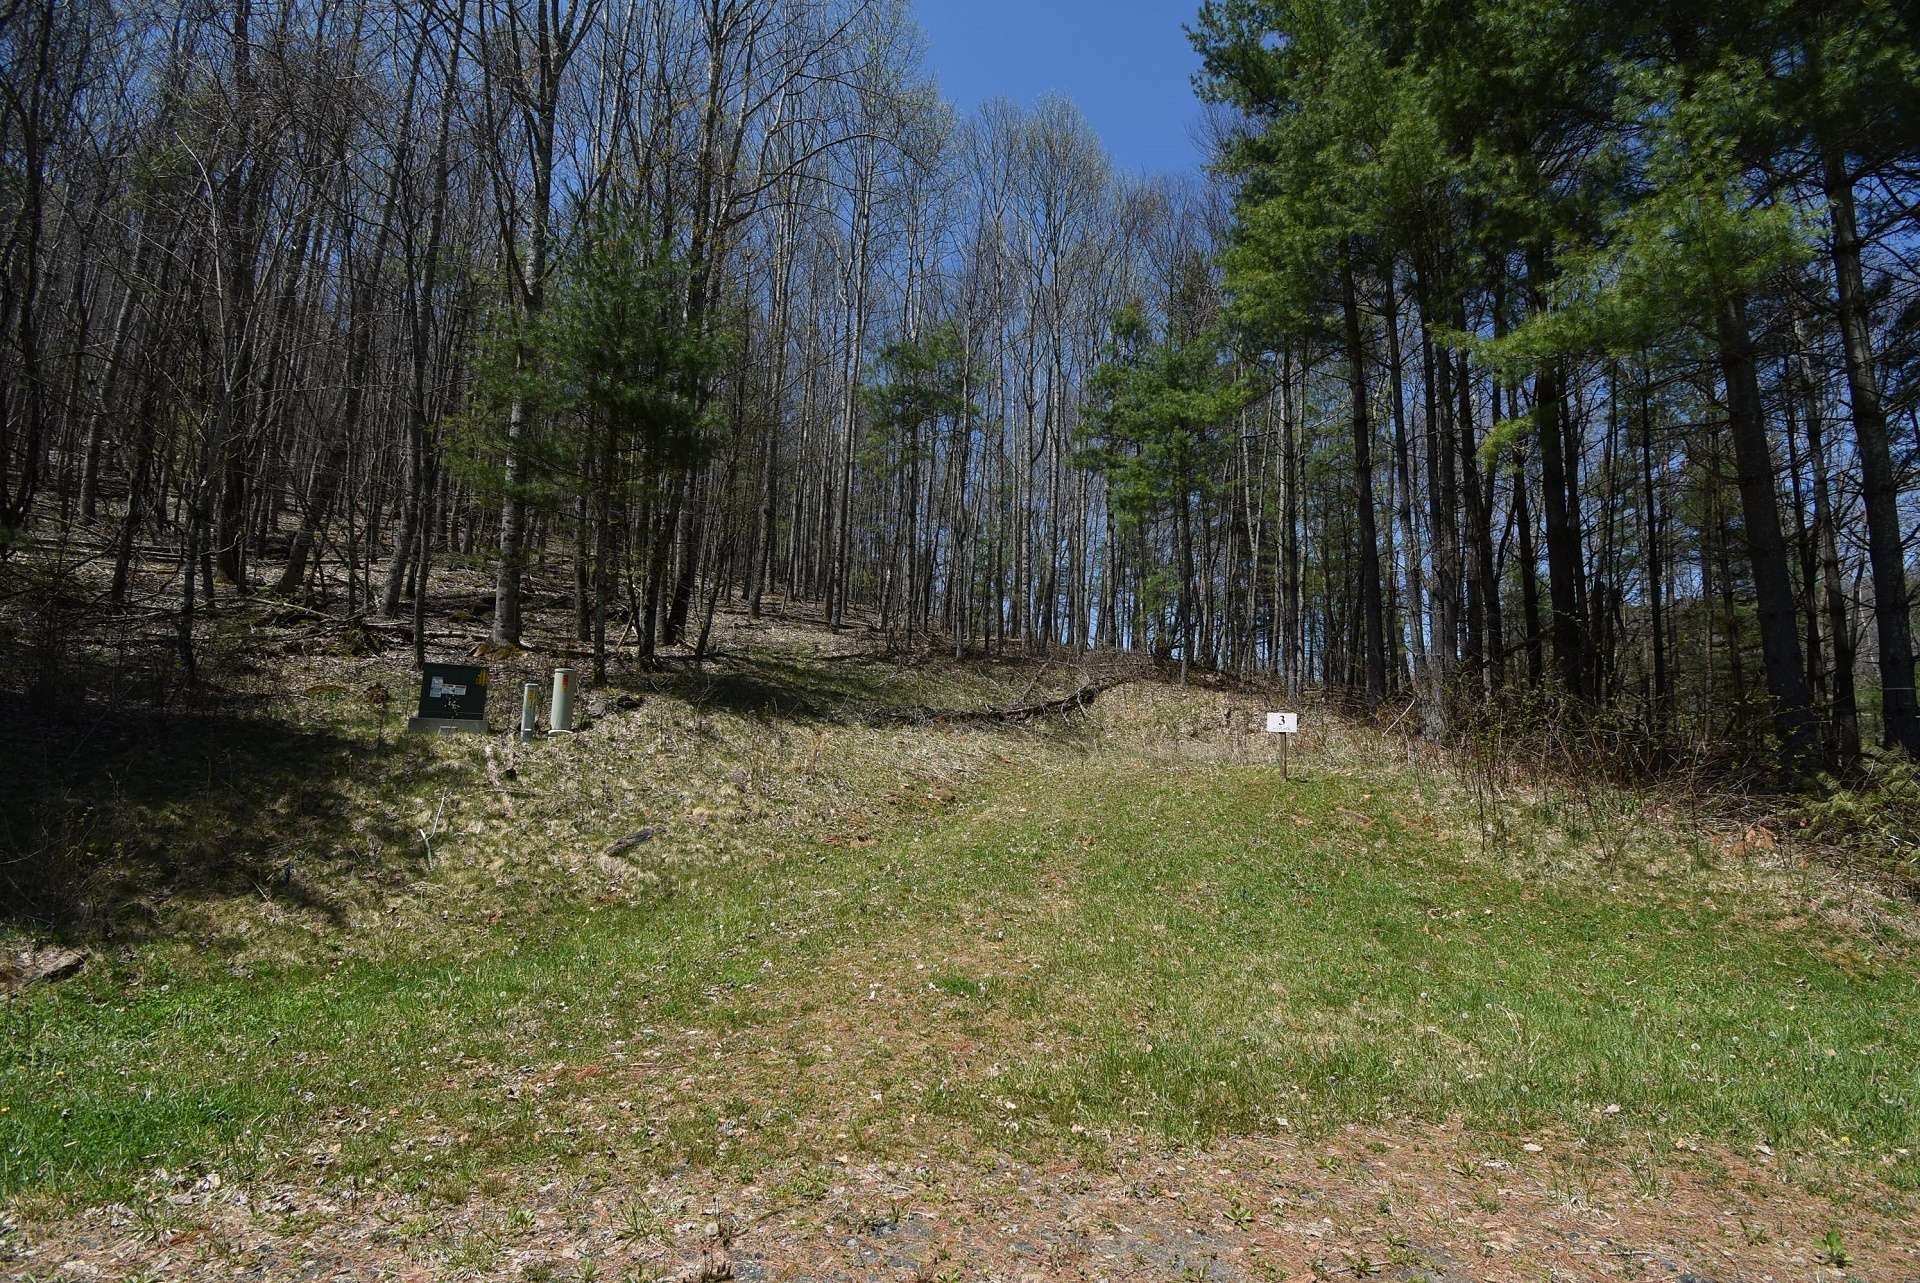 Lot 16 is a gorgeous wooded 1.48 acre homesite now available in Riverwalk at Todd. This lot has a 3-bedroom septic permit and ideal for your NC Mountain retreat cabin or primary residence.